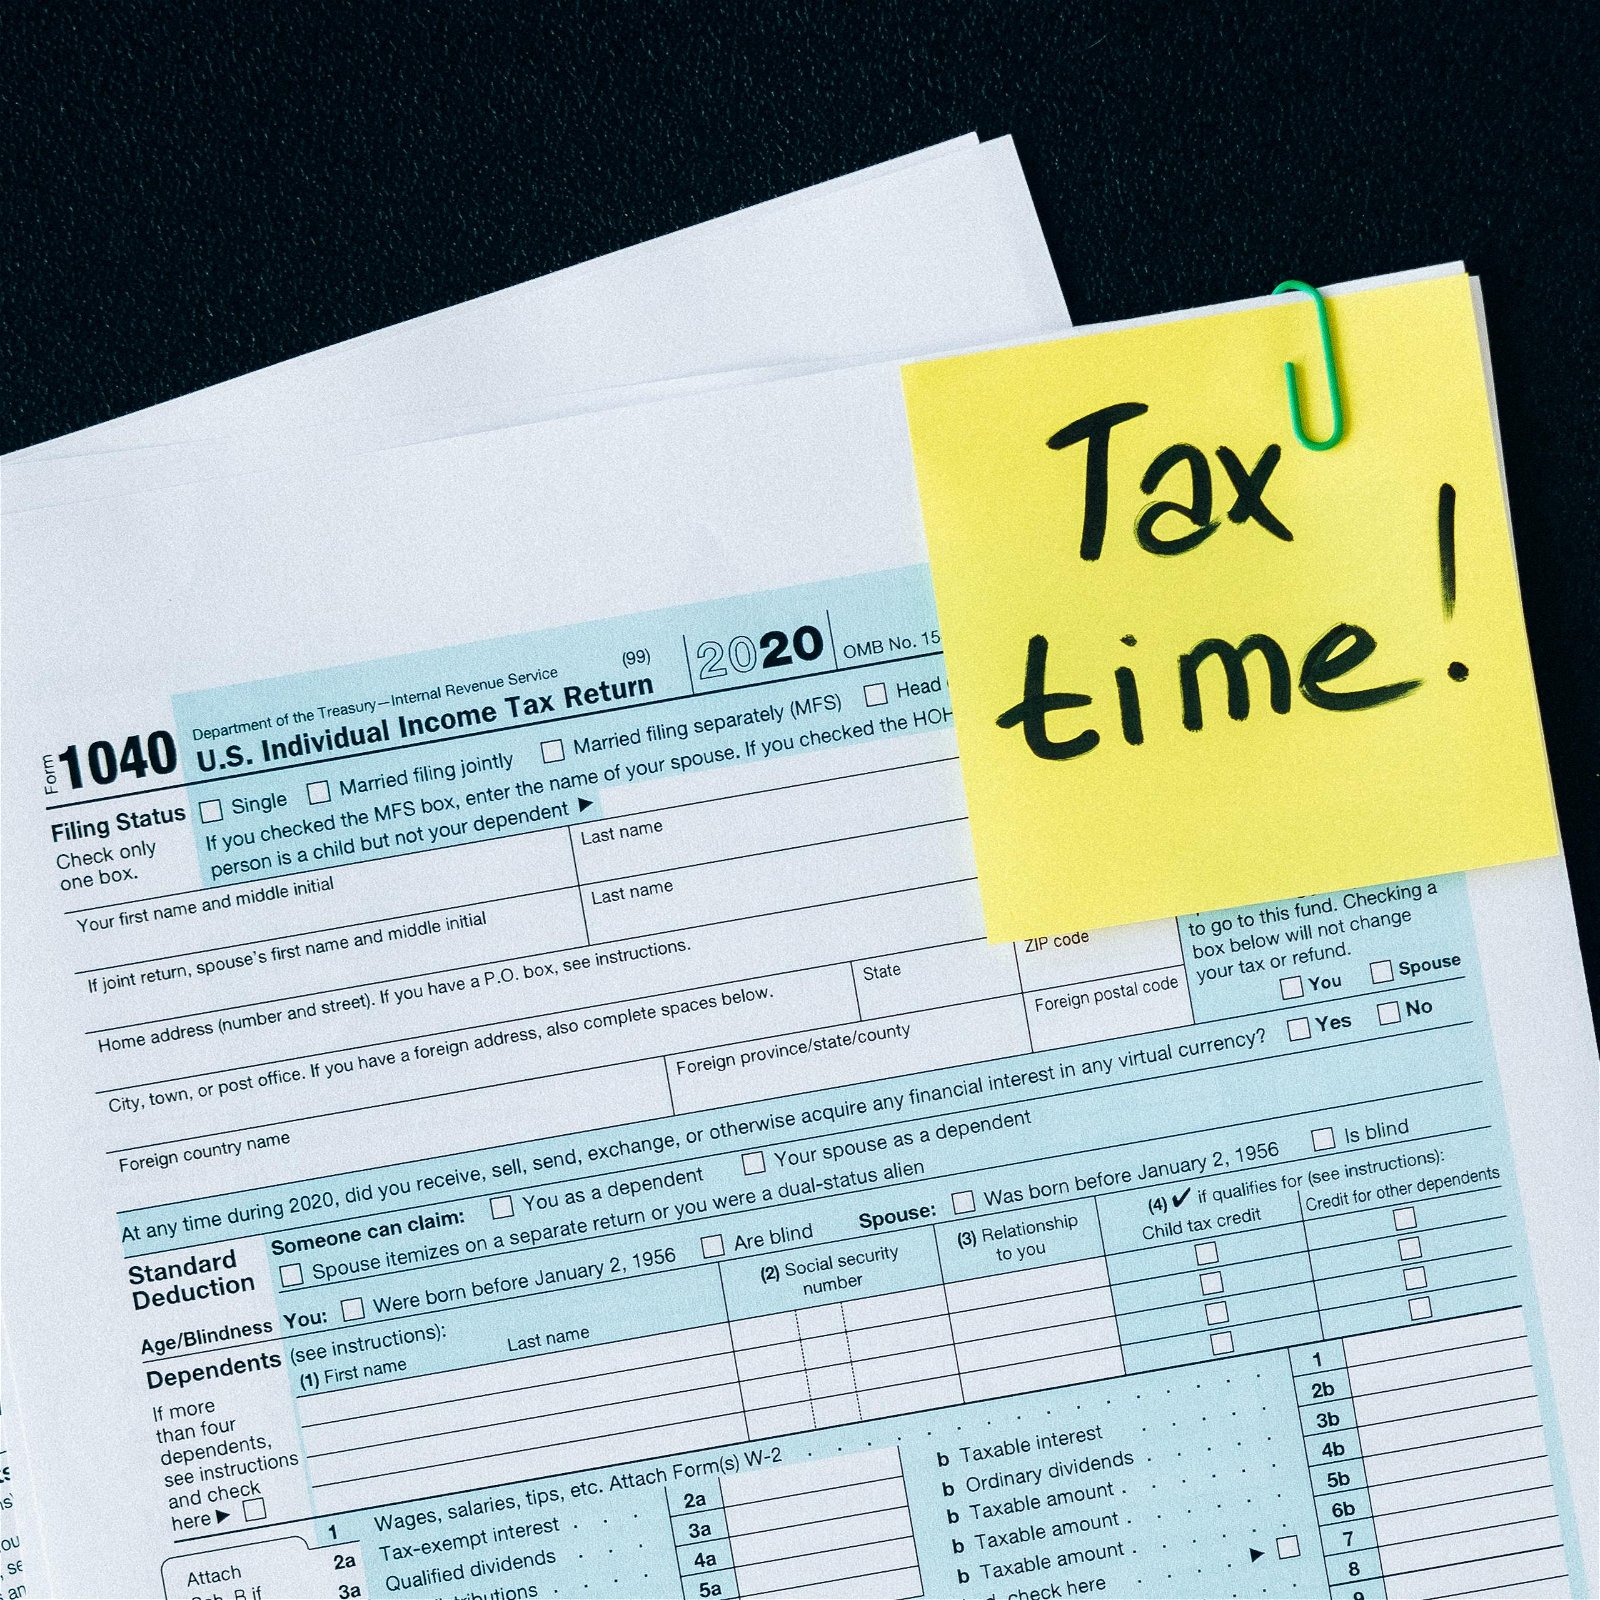 Have your tax return translated